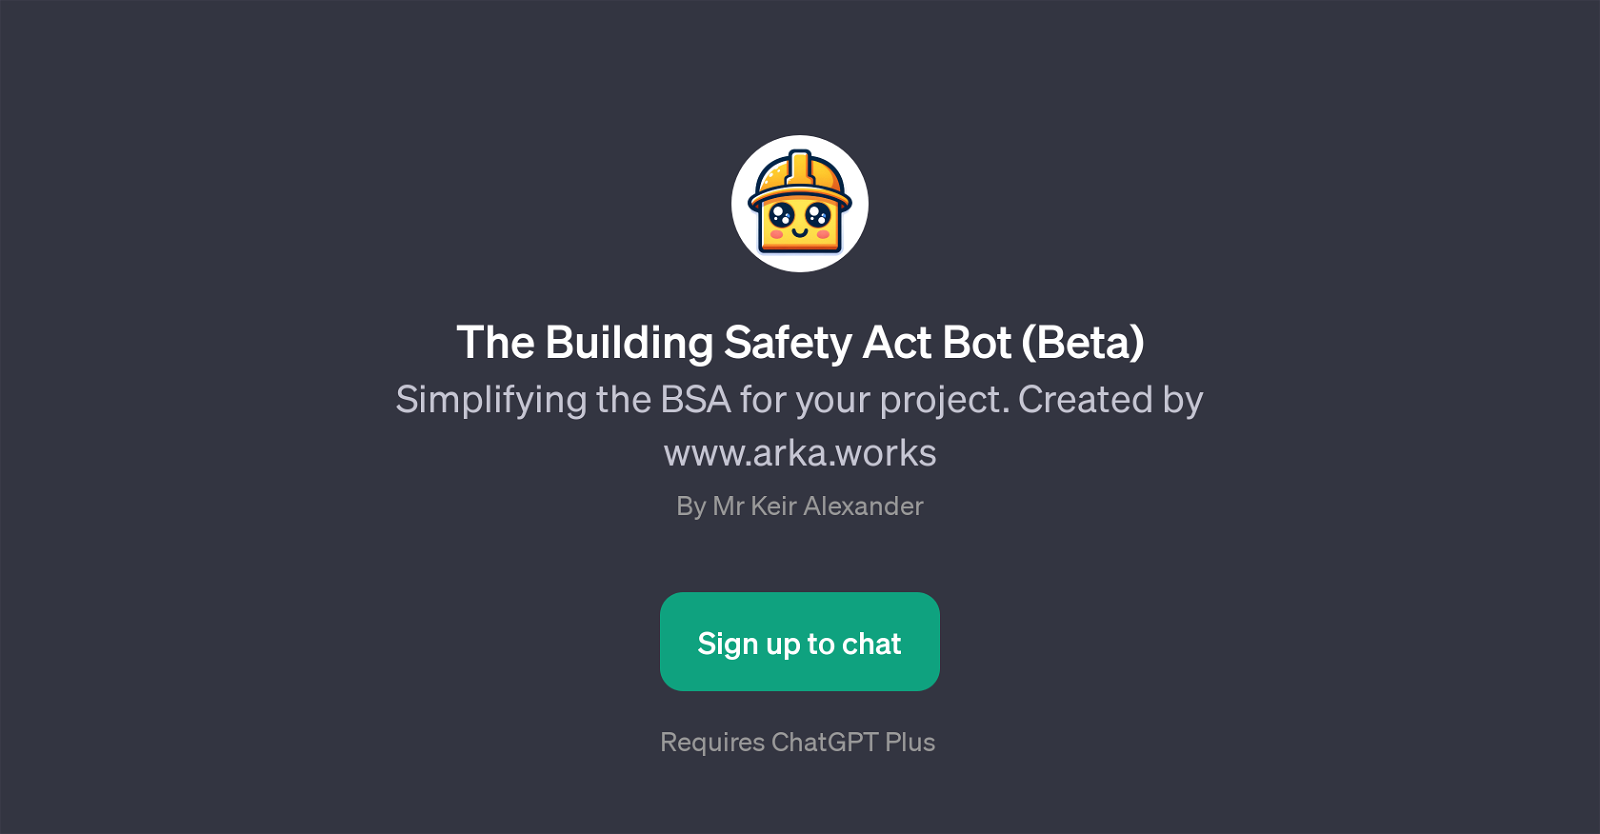 The Building Safety Act Bot (Beta) website